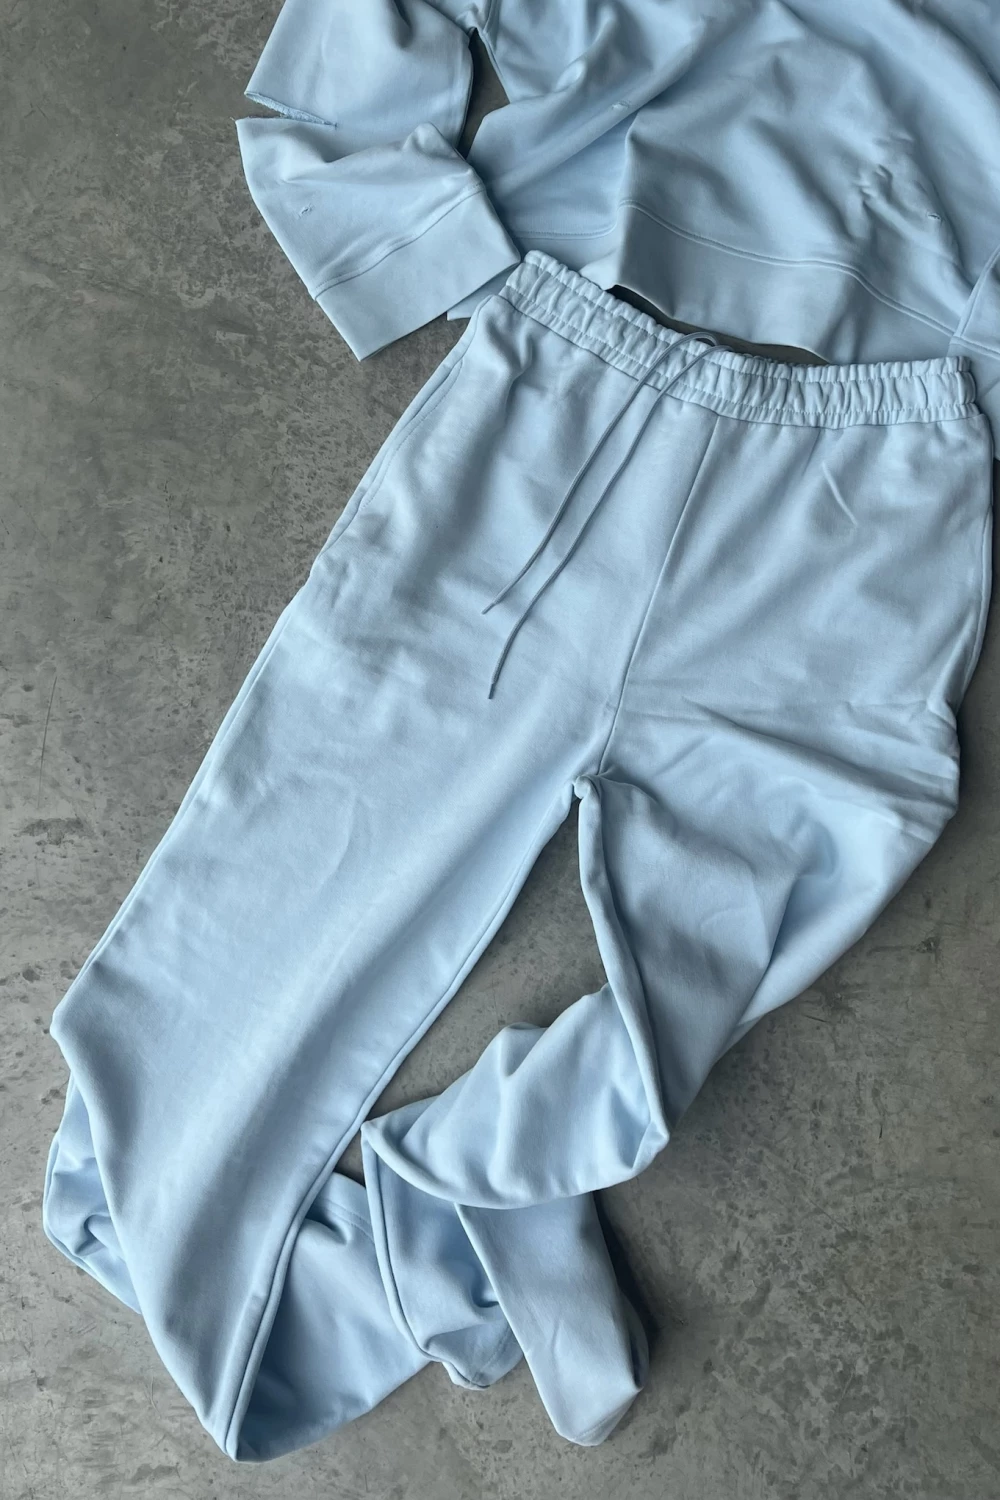 pants "real big" in blue color